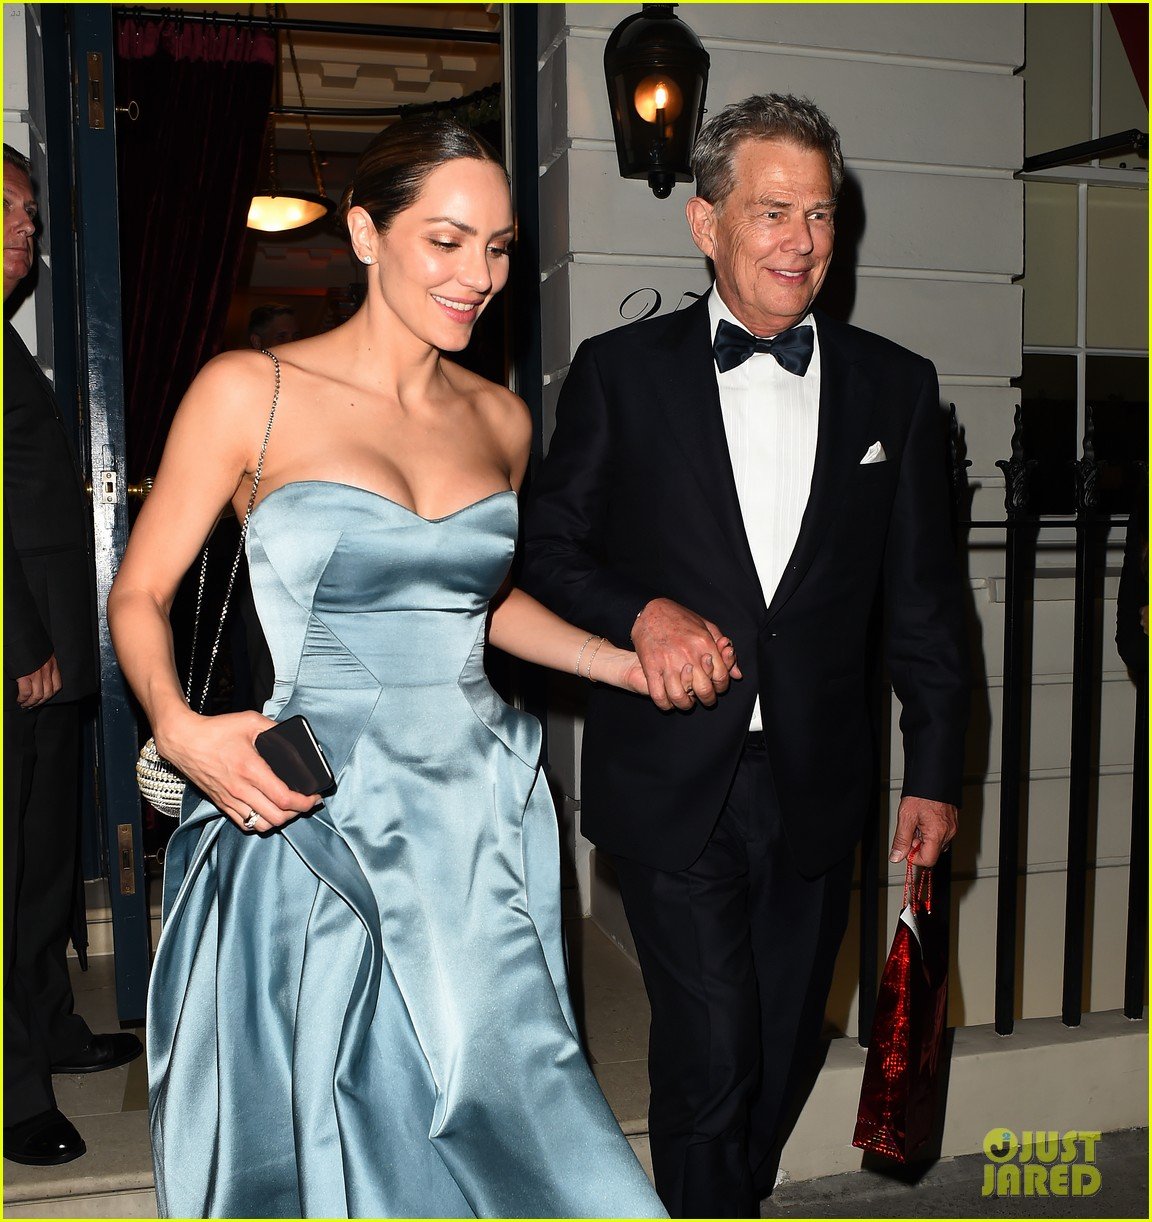 katharine mcphee changes into blue dress after wedding david foster 04